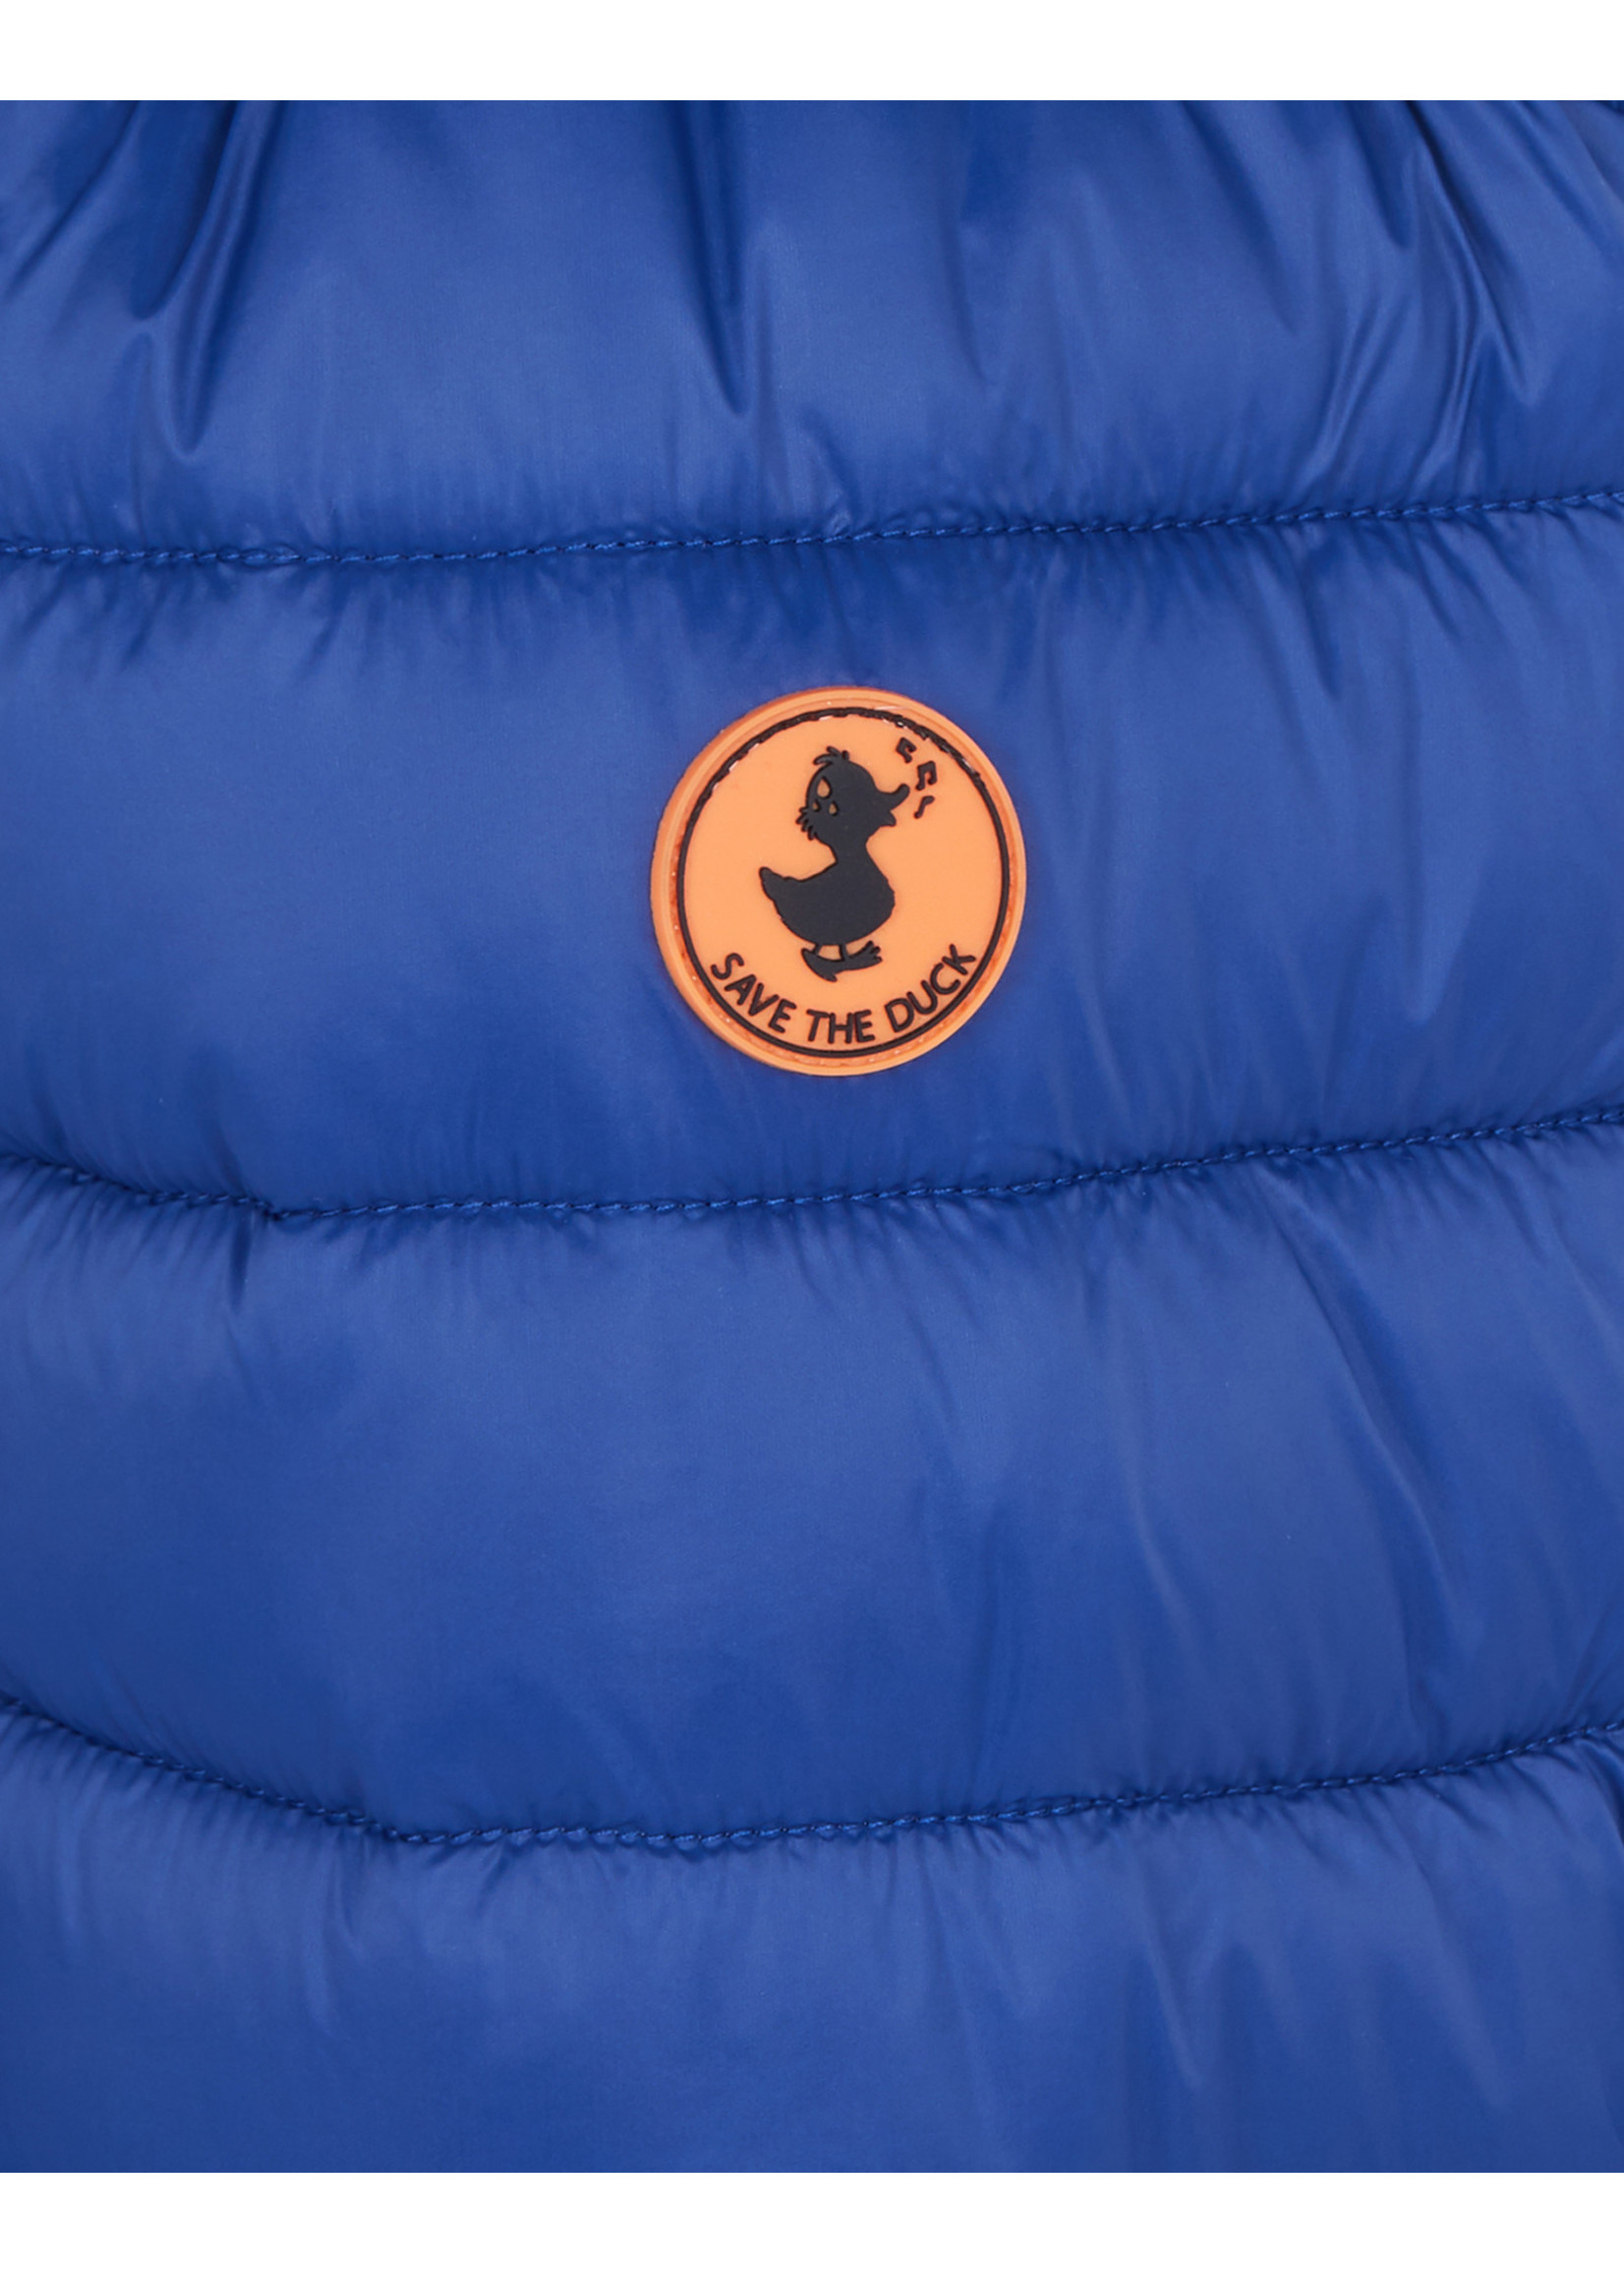 Save The Duck Save The Duck mid season Jacket eclipse blue - J30650B